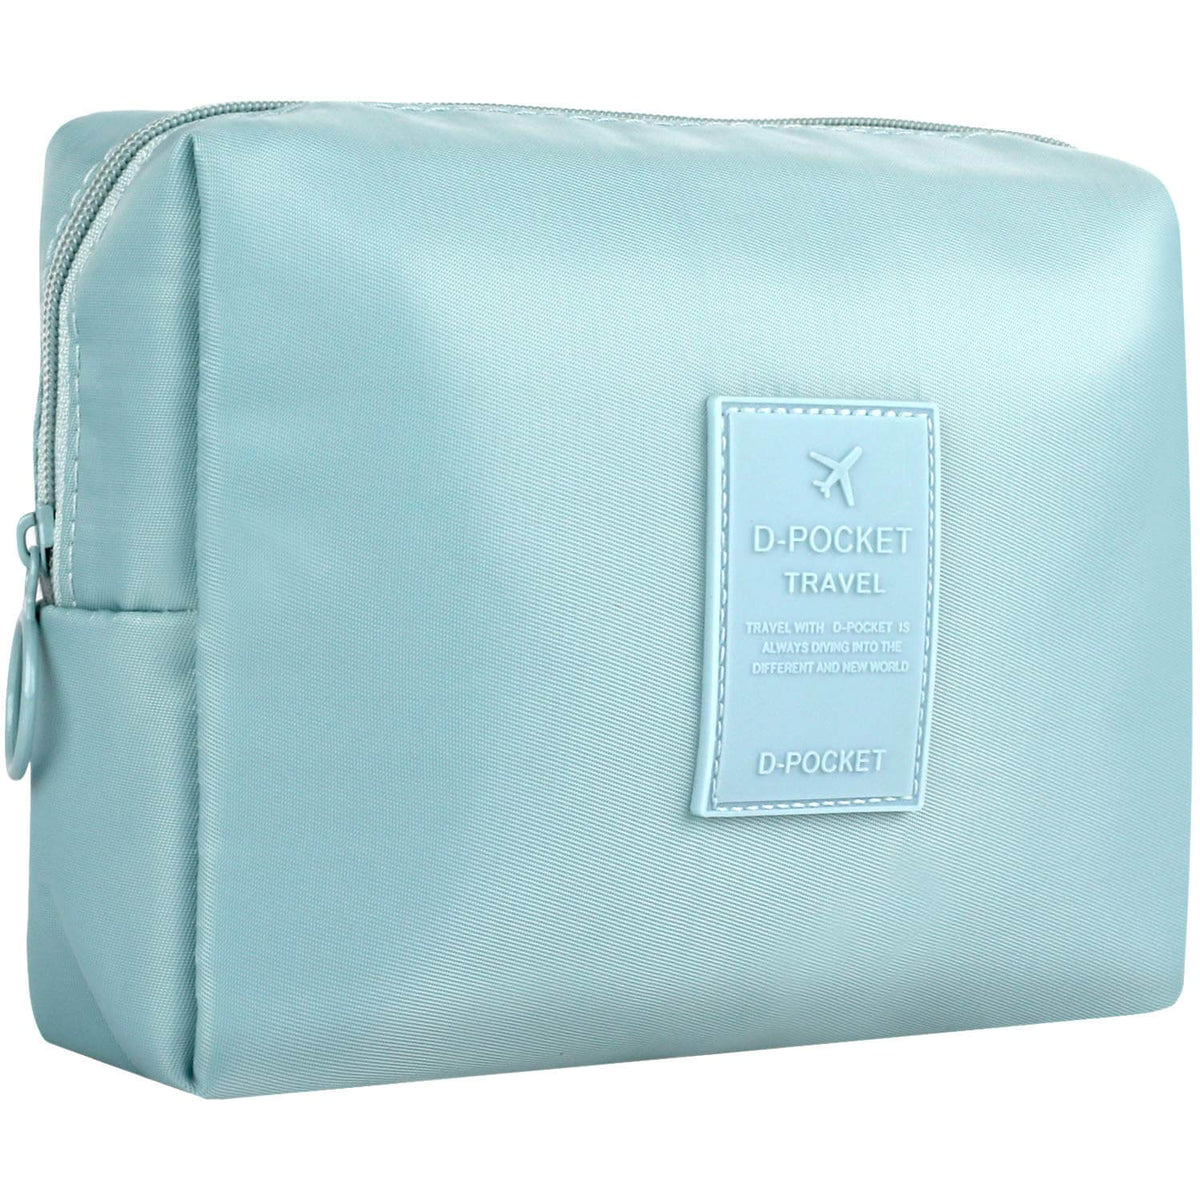 New Arrival Small Size Narwey 5018 Makeup Bag Hot Travel Cosmetic Bag –  narwey